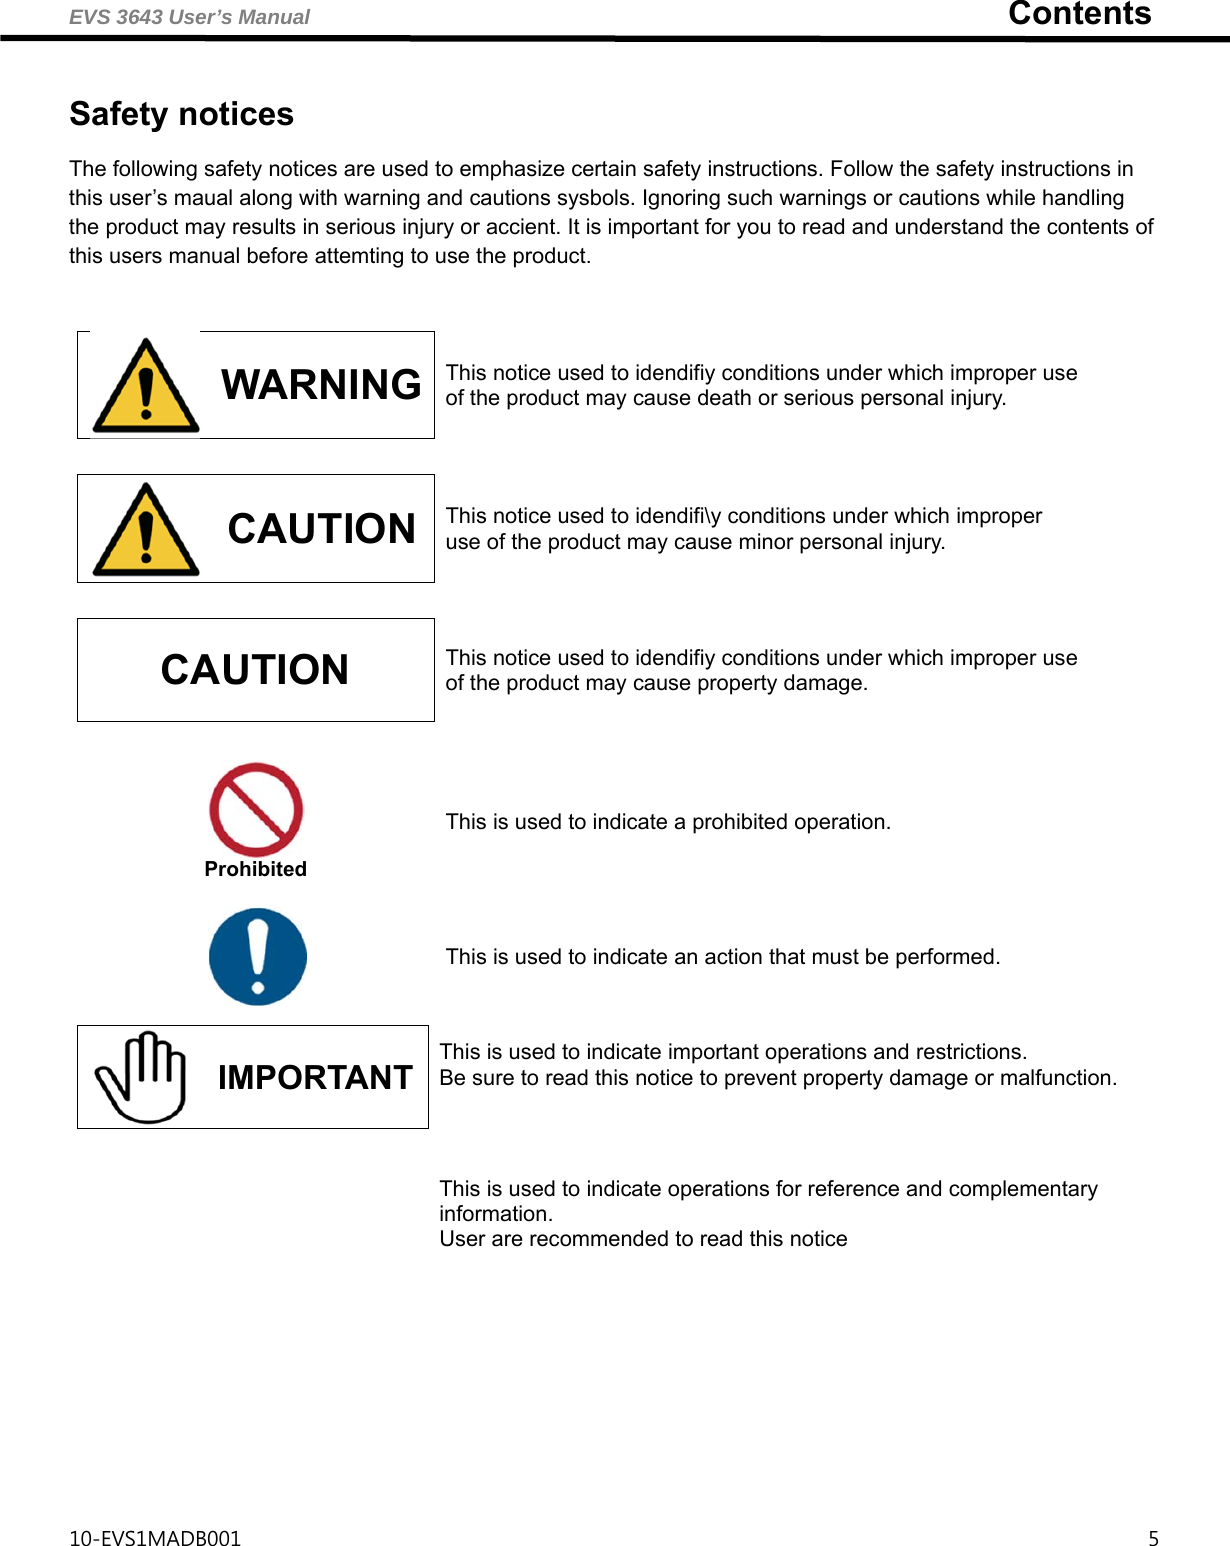 EVS 3643 User’s Manual                                                                   Contents 10-EVS1MADB001                                                                                       5   Safety notices  The following safety notices are used to emphasize certain safety instructions. Follow the safety instructions in this user’s maual along with warning and cautions sysbols. Ignoring such warnings or cautions while handling the product may results in serious injury or accient. It is important for you to read and understand the contents of this users manual before attemting to use the product.                                      WARNING  This notice used to idendifiy conditions under which improper use of the product may cause death or serious personal injury.  CAUTION  This notice used to idendifi\y conditions under which improper use of the product may cause minor personal injury. CAUTION  This notice used to idendifiy conditions under which improper use of the product may cause property damage.  Prohibited This is used to indicate a prohibited operation.  This is used to indicate an action that must be performed.  IMPORTANT This is used to indicate important operations and restrictions.   Be sure to read this notice to prevent property damage or malfunction.     This is used to indicate operations for reference and complementary information. User are recommended to read this notice 